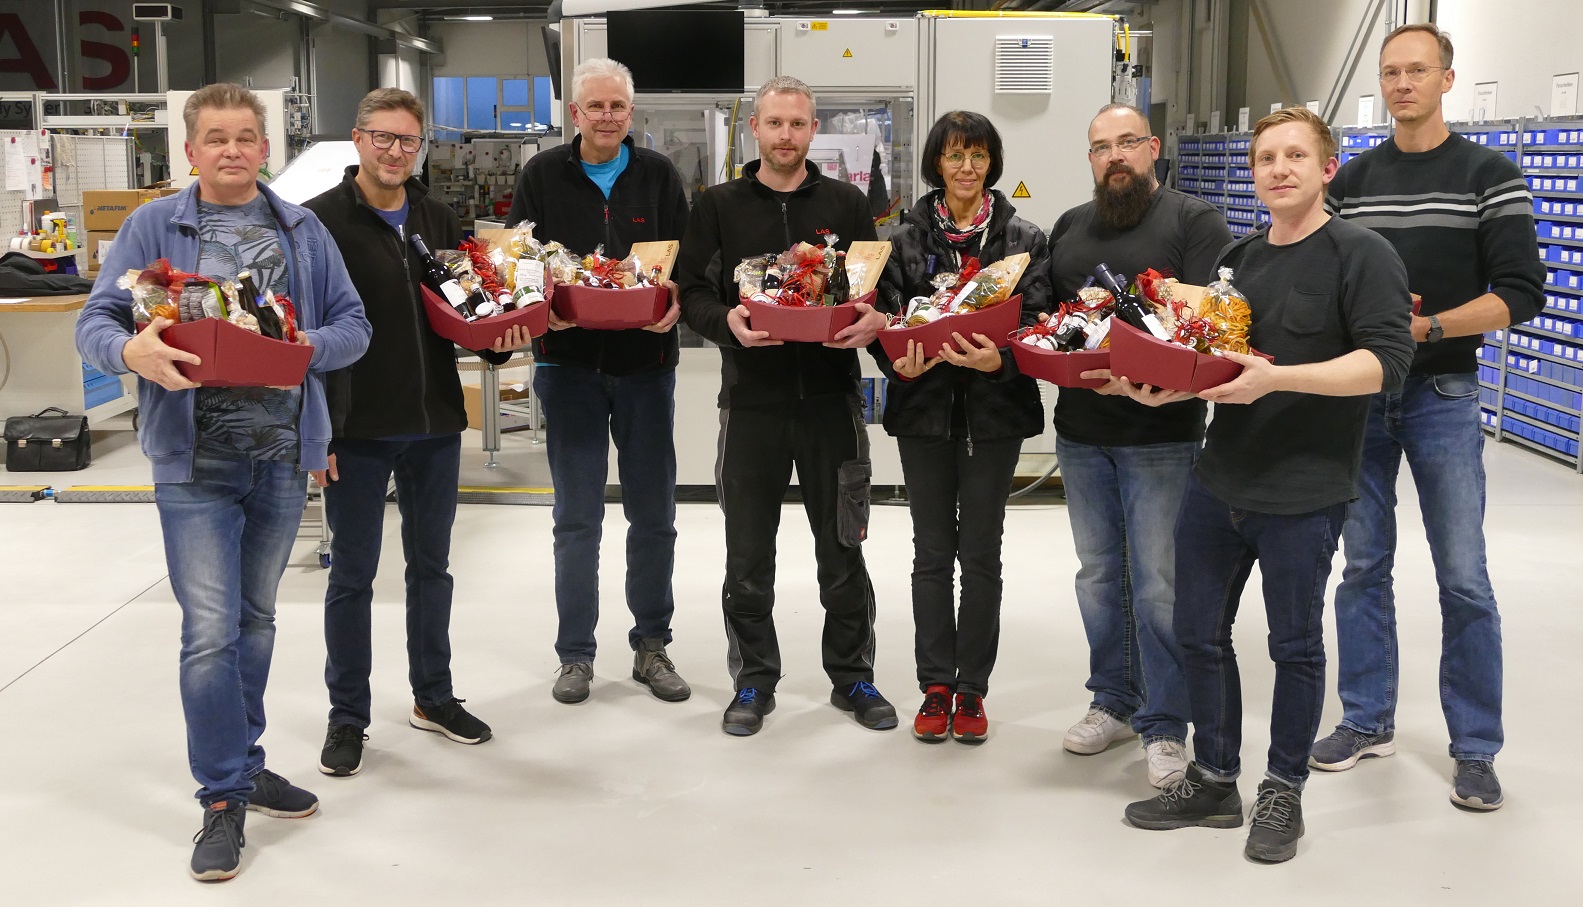 Eight LAS employees with gift baskets that they received on their 10th anniversary with the company